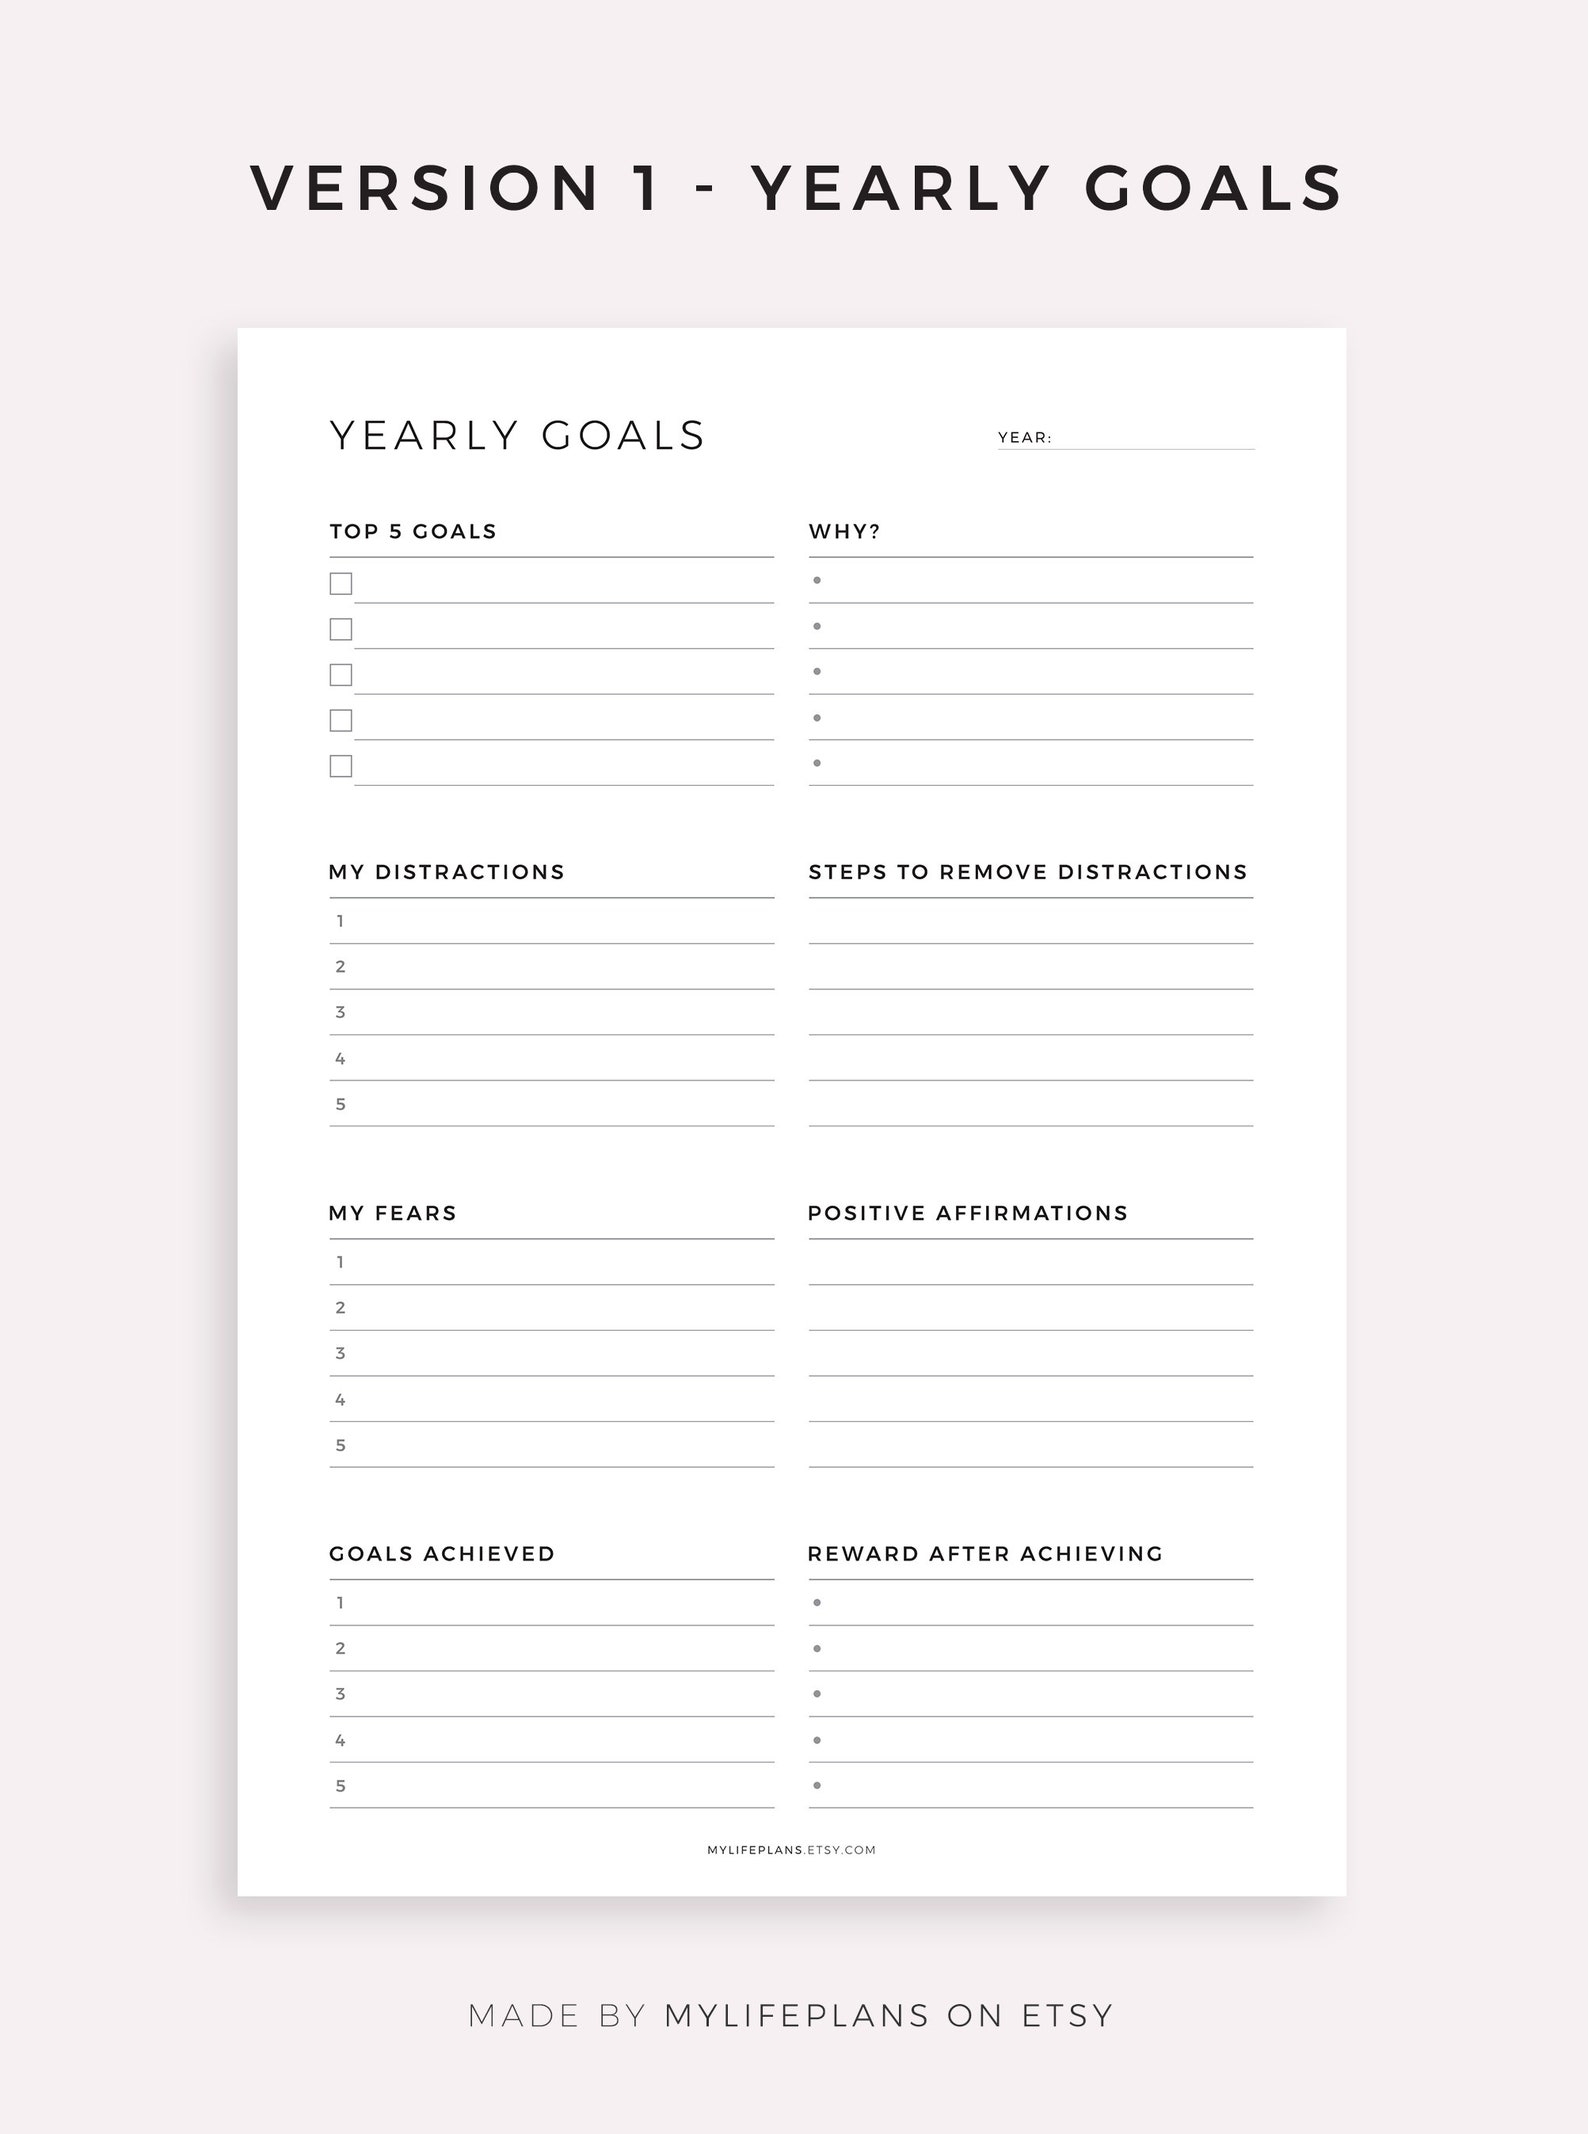 Goal Planner Printable & Fillable PDF Yearly Goals - Etsy